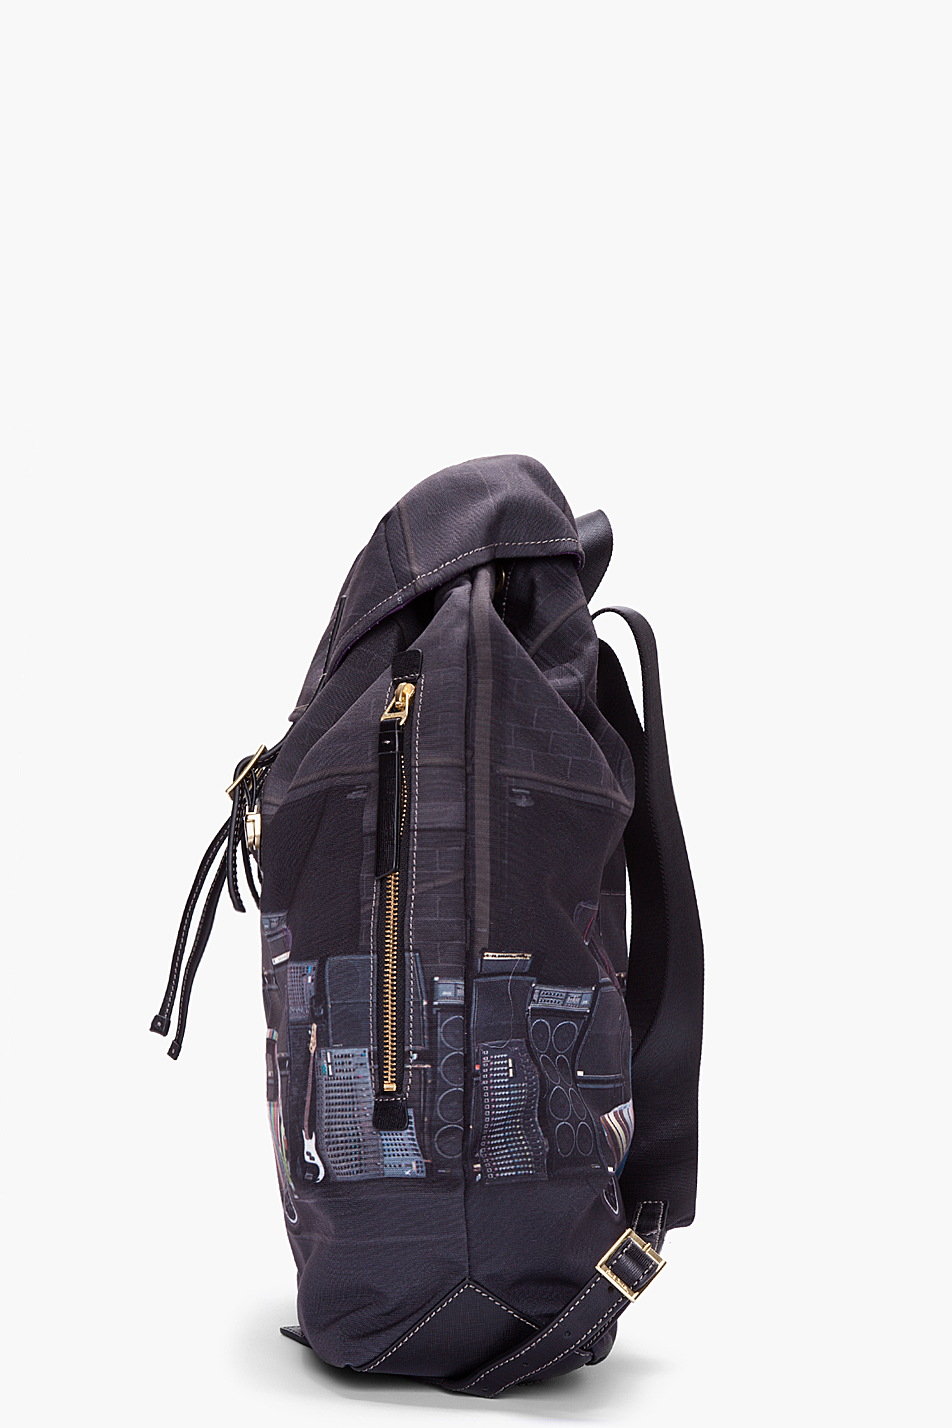 Lyst - Paul Smith Leather Trim Mini Cooper Backpack in Black for Men